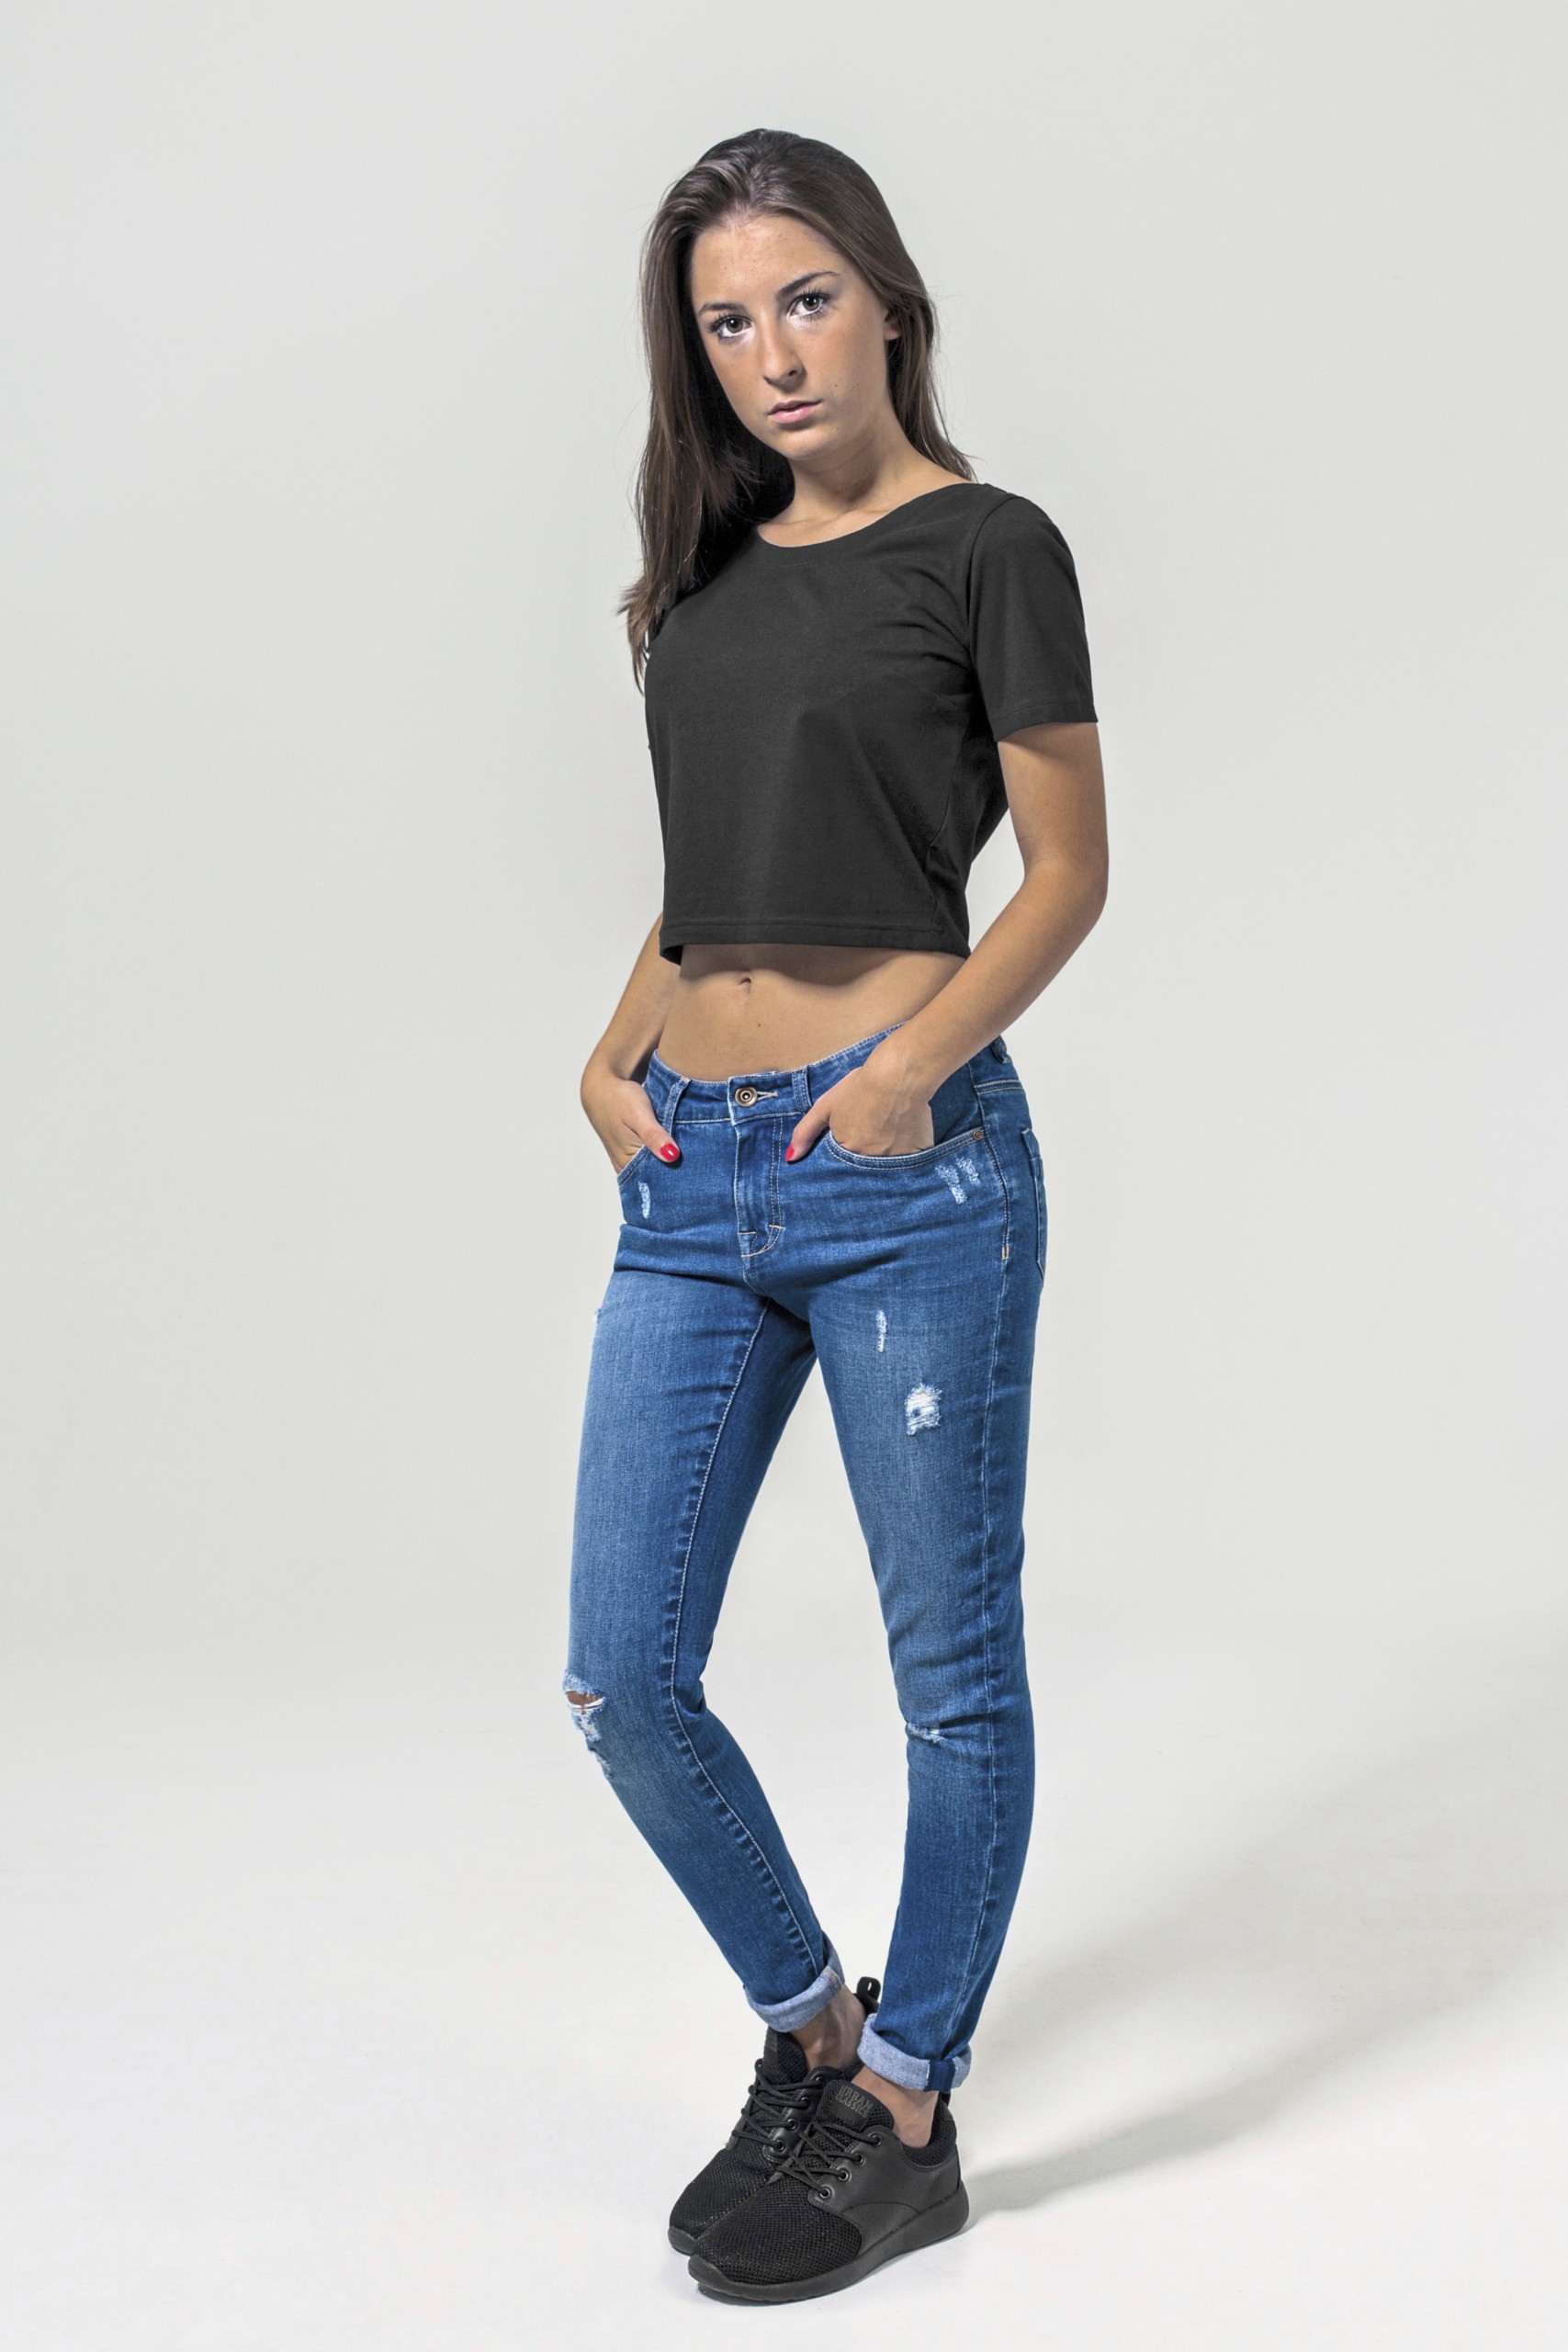 Build Your Brand - Build Your Brand - Ladies´ Cropped Tee - BY042